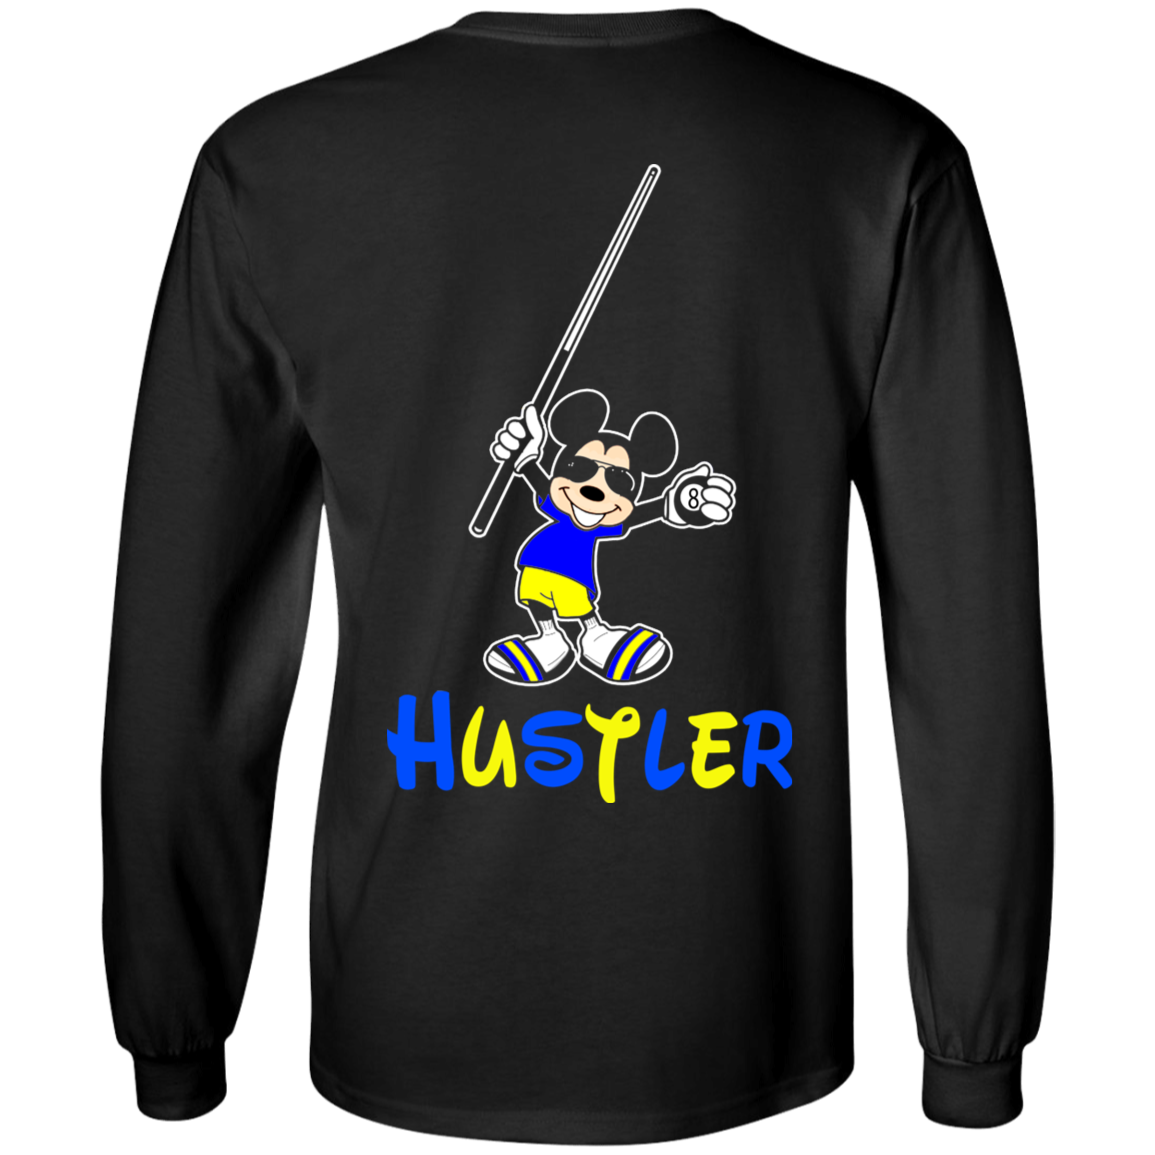 The GHOATS Custom Design #20. Look at the back. Hustle Mouse. Mickey Mouse Fan Art. 100% Basic Cotton Long Sleeve